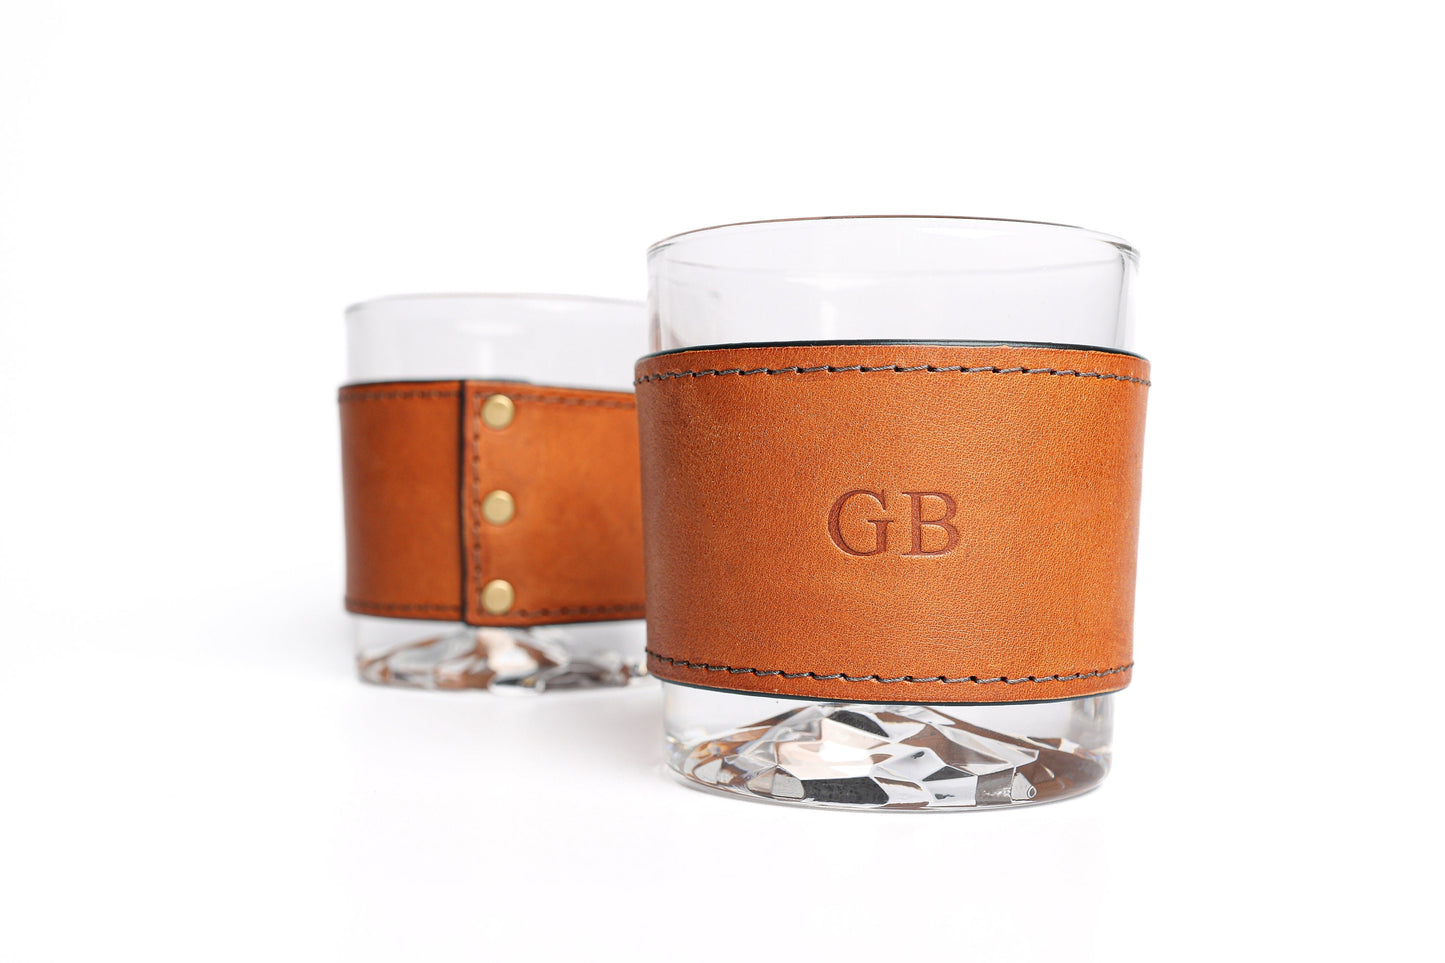 Personalized Rock glasses with leather wrap, whiskey glasses, 10 oz, bourbon glasses, Fathers day, Corporate Gifts, Old Fashioned, set of 2.